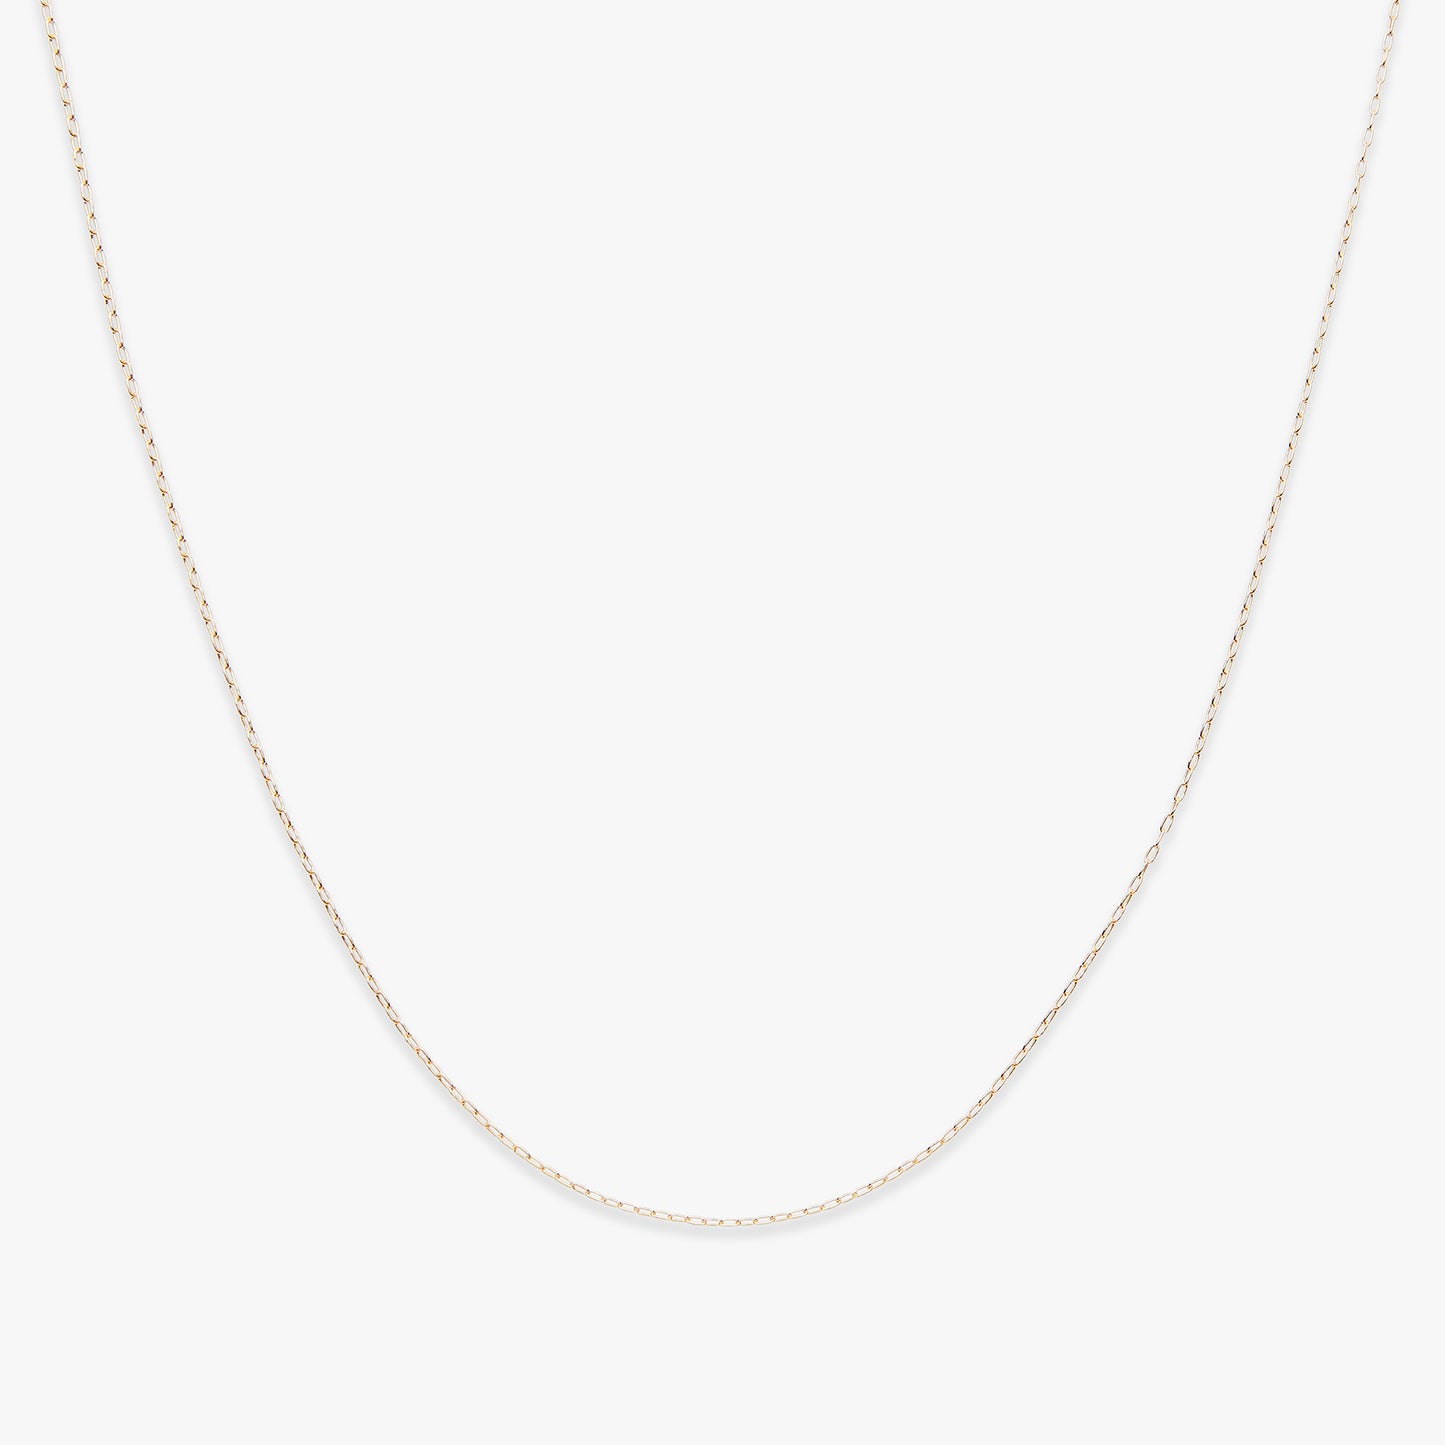 Basic drawn cable chain ketting gold filled